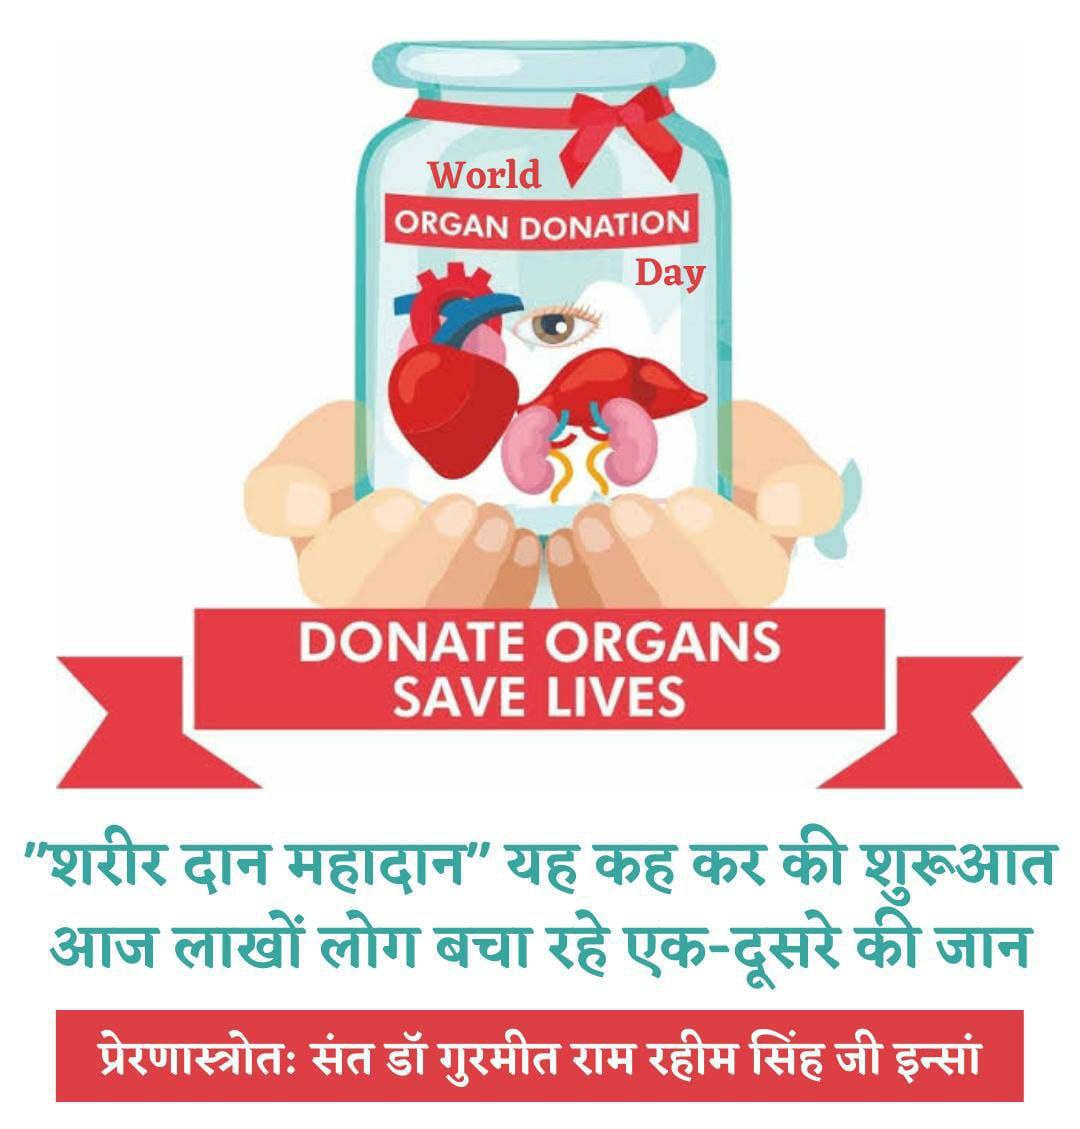 @DSSNewsUpdates Devotees of Dera Sacha Sauda donate kidney while alive and body after death with the holy inspiration of respected Guru Saint MSG.
#WorldOrganDonationDay